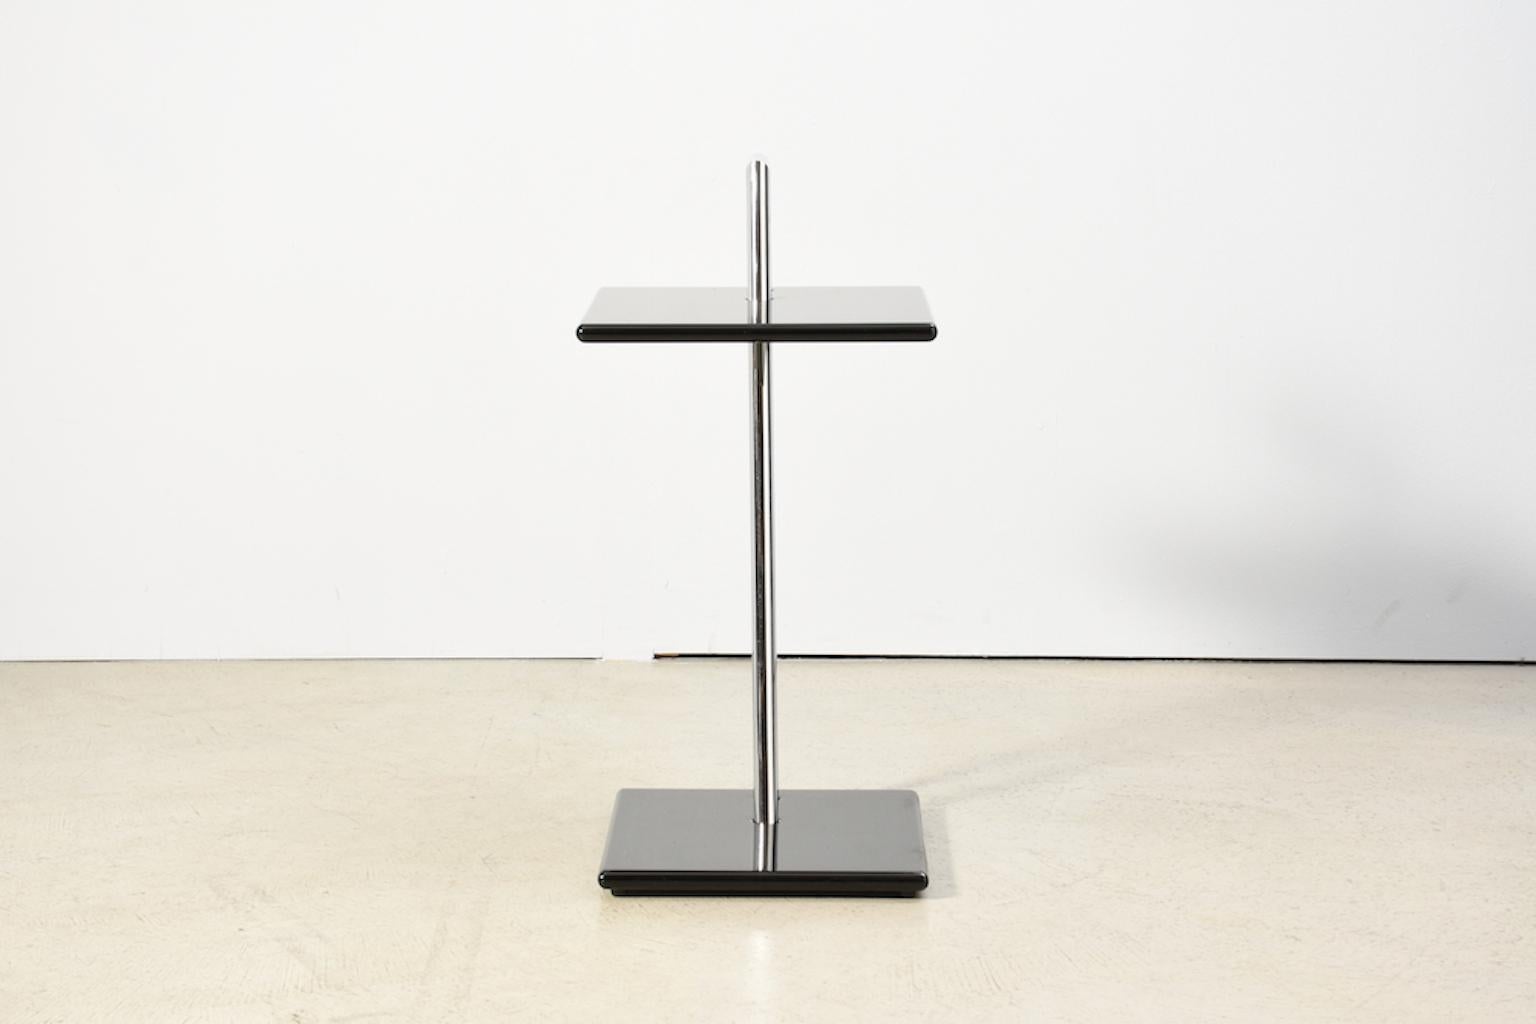 Side table by Eileen Gray. Chrome steel and wood glossy lacquered in black. Version from the 1970s. Produced in Venice / Italy. This version is much bigger than the version made today by Classicon.
Upper shelf 35x40 cm
Lower shelf 32x35 cm
Total